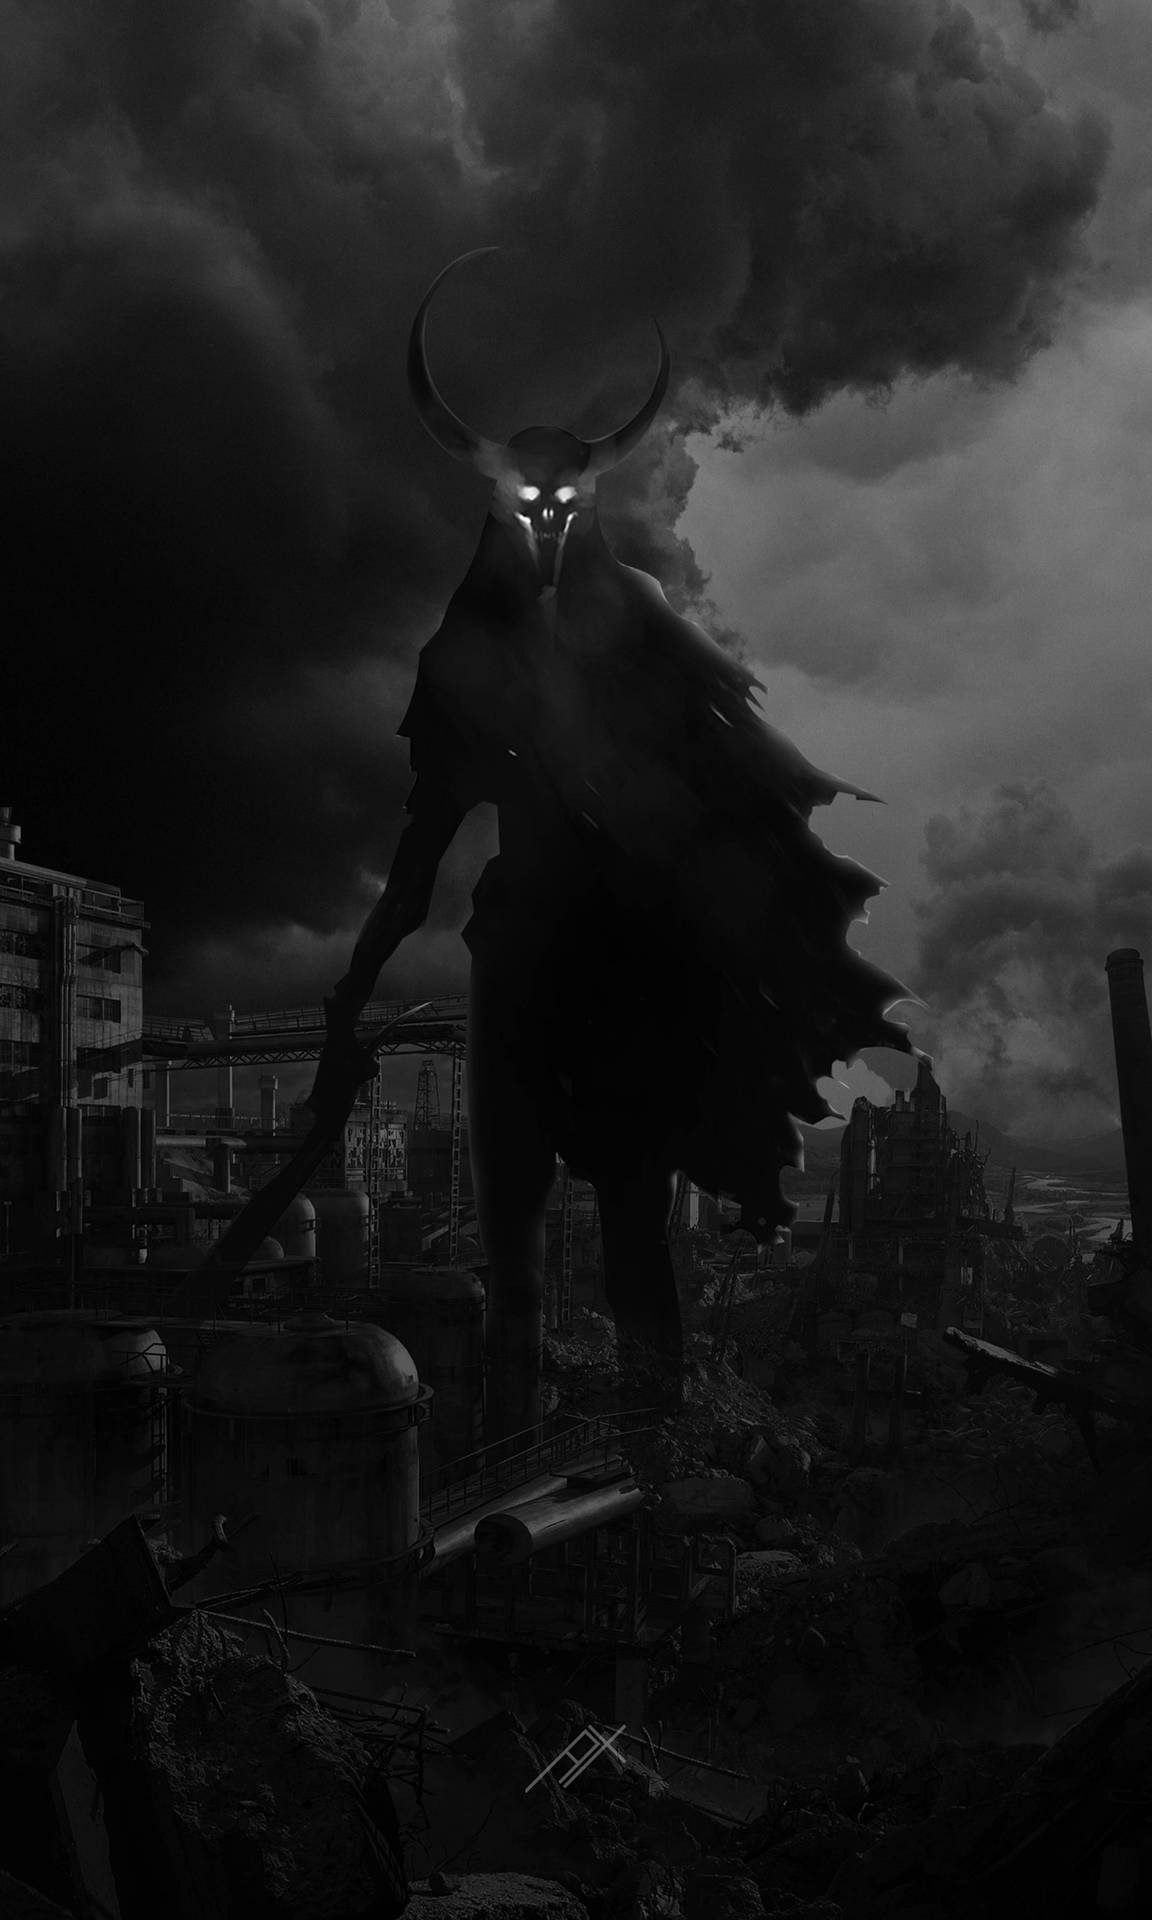 Ominous Apocalyptic Creature Black-And-White Wallpaper